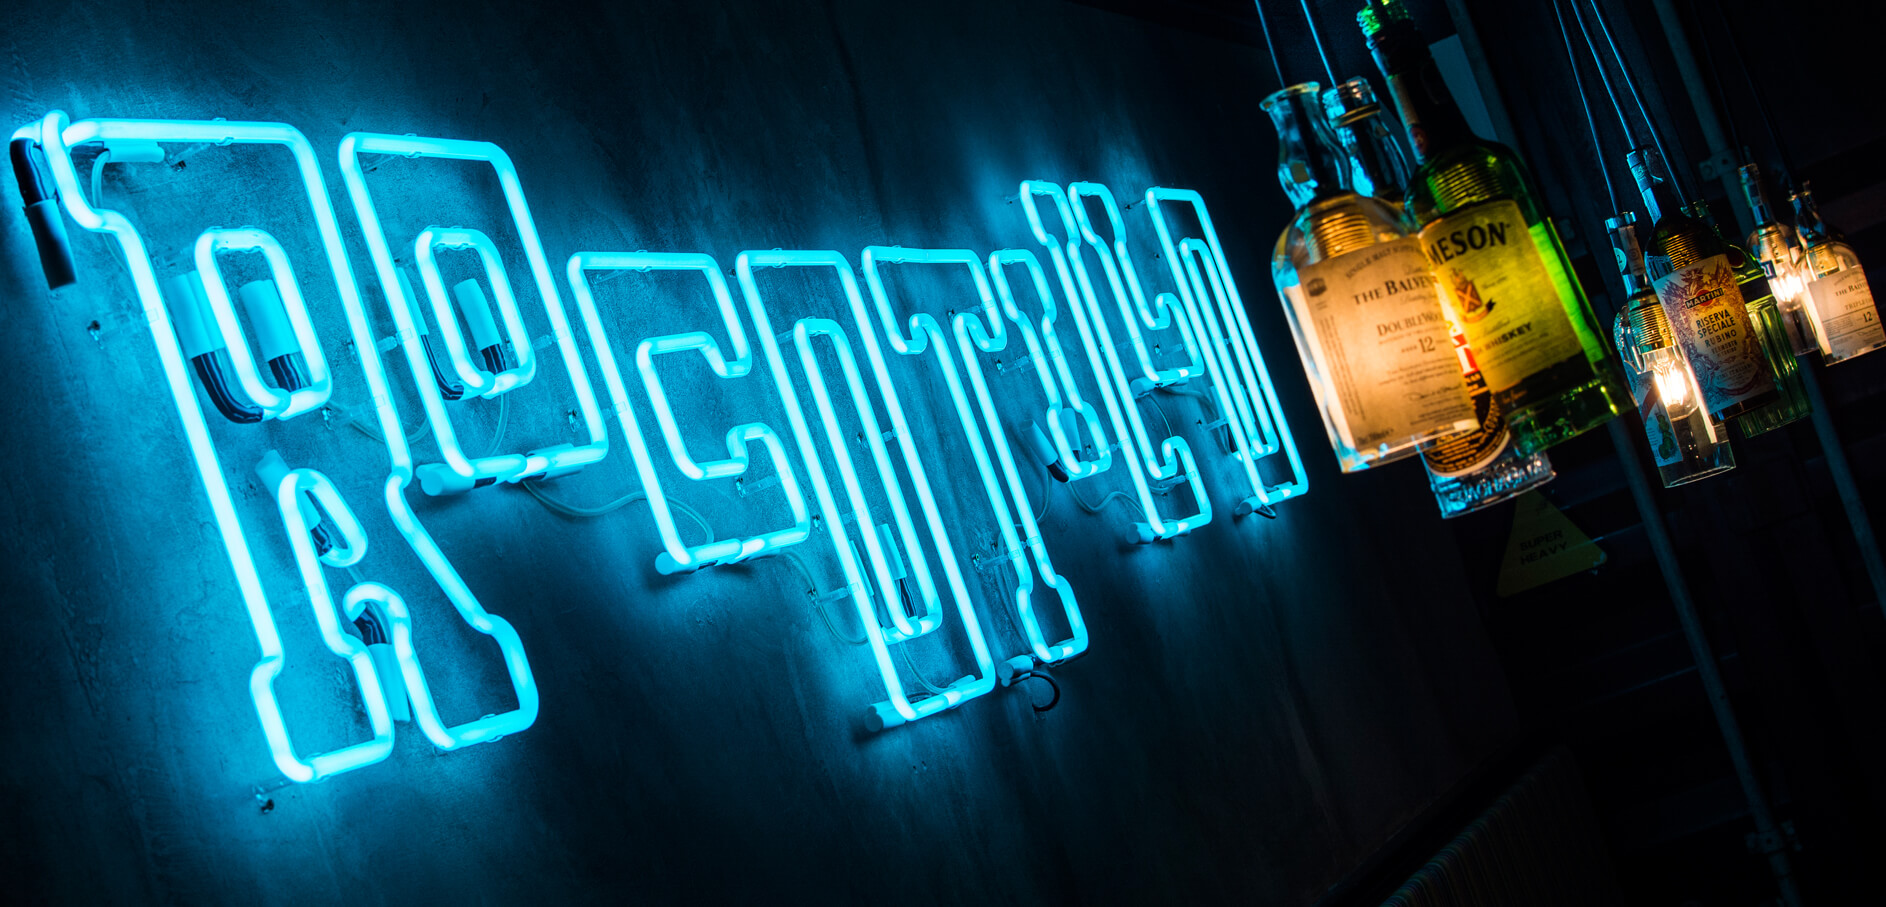 Rocotilli - neon-rocotillo-neon-sur-le-mur-intérieur-restaurant-neon-mounted-to-the-wall-neon-over-tables-neon-under-light-neon-on-the-concrete-wall-neon-glass-neon-logo-sign